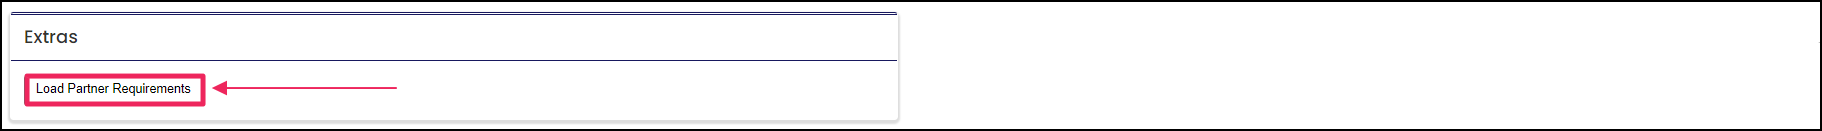 image of extra panel highlighting Load Partner Requirements button